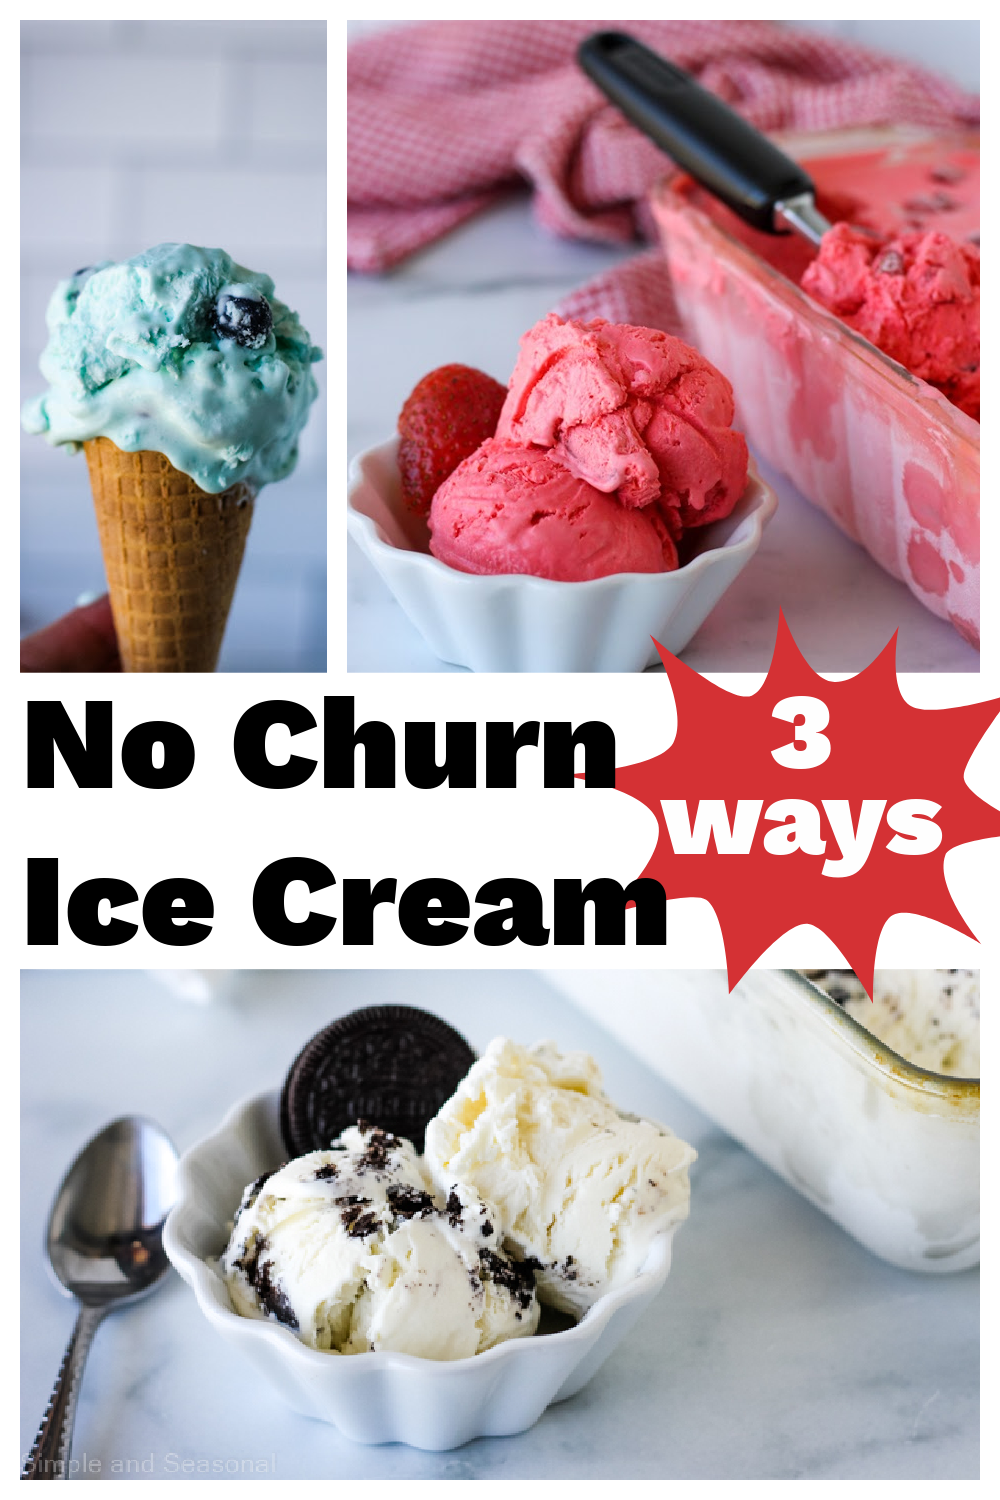 Start with a basic no churn ice cream recipe and make it your own with these 3 different options for flavoring! Homemade ice cream doesn't get any easier than this! via @nmburk